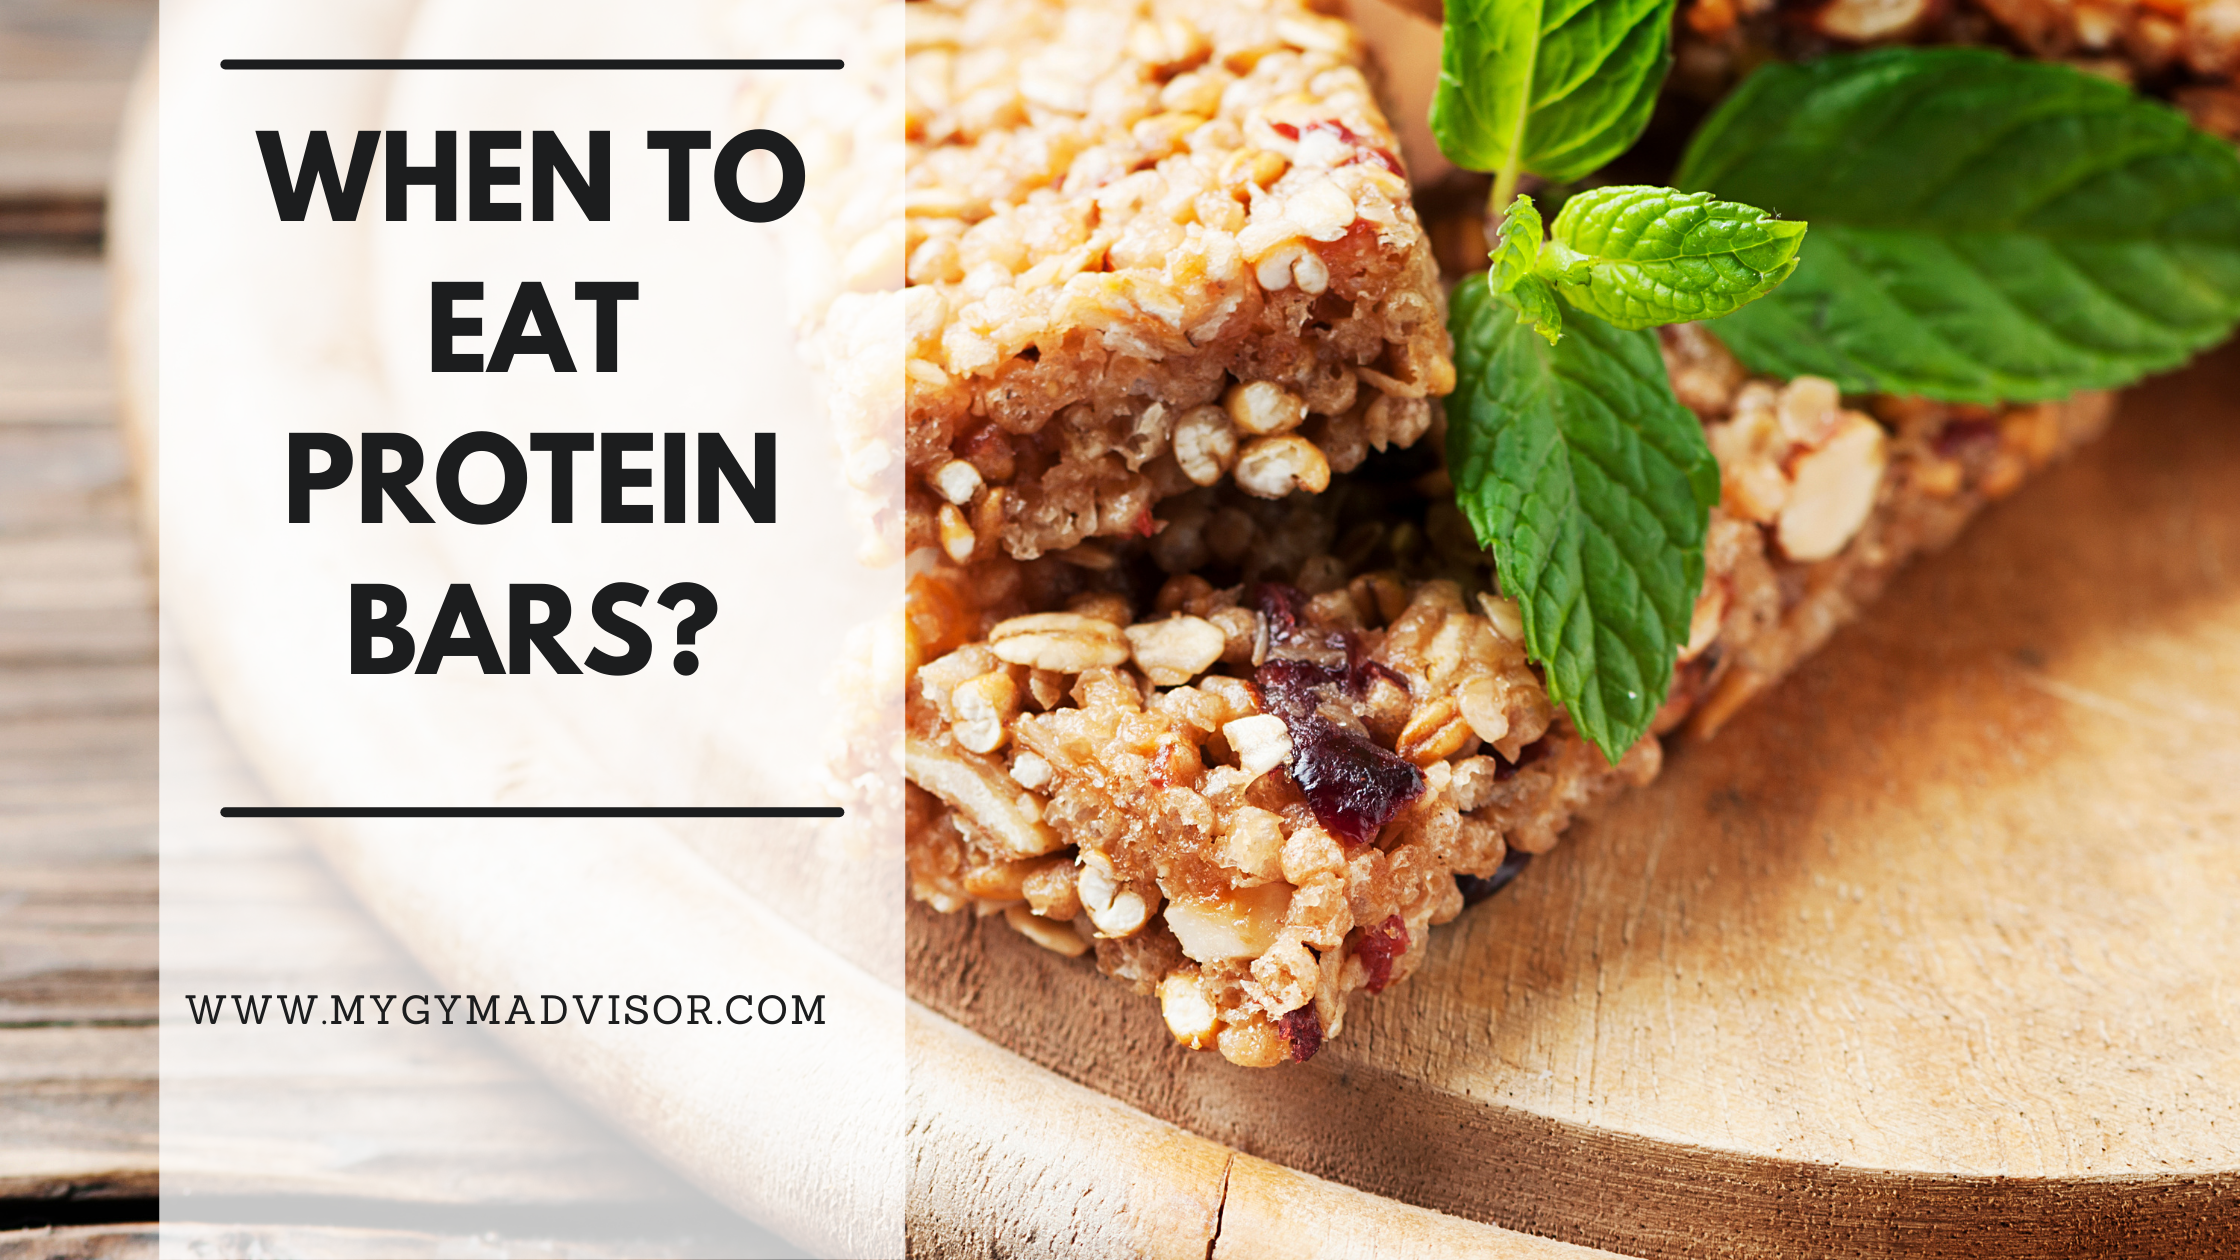 When to eat protein bars?